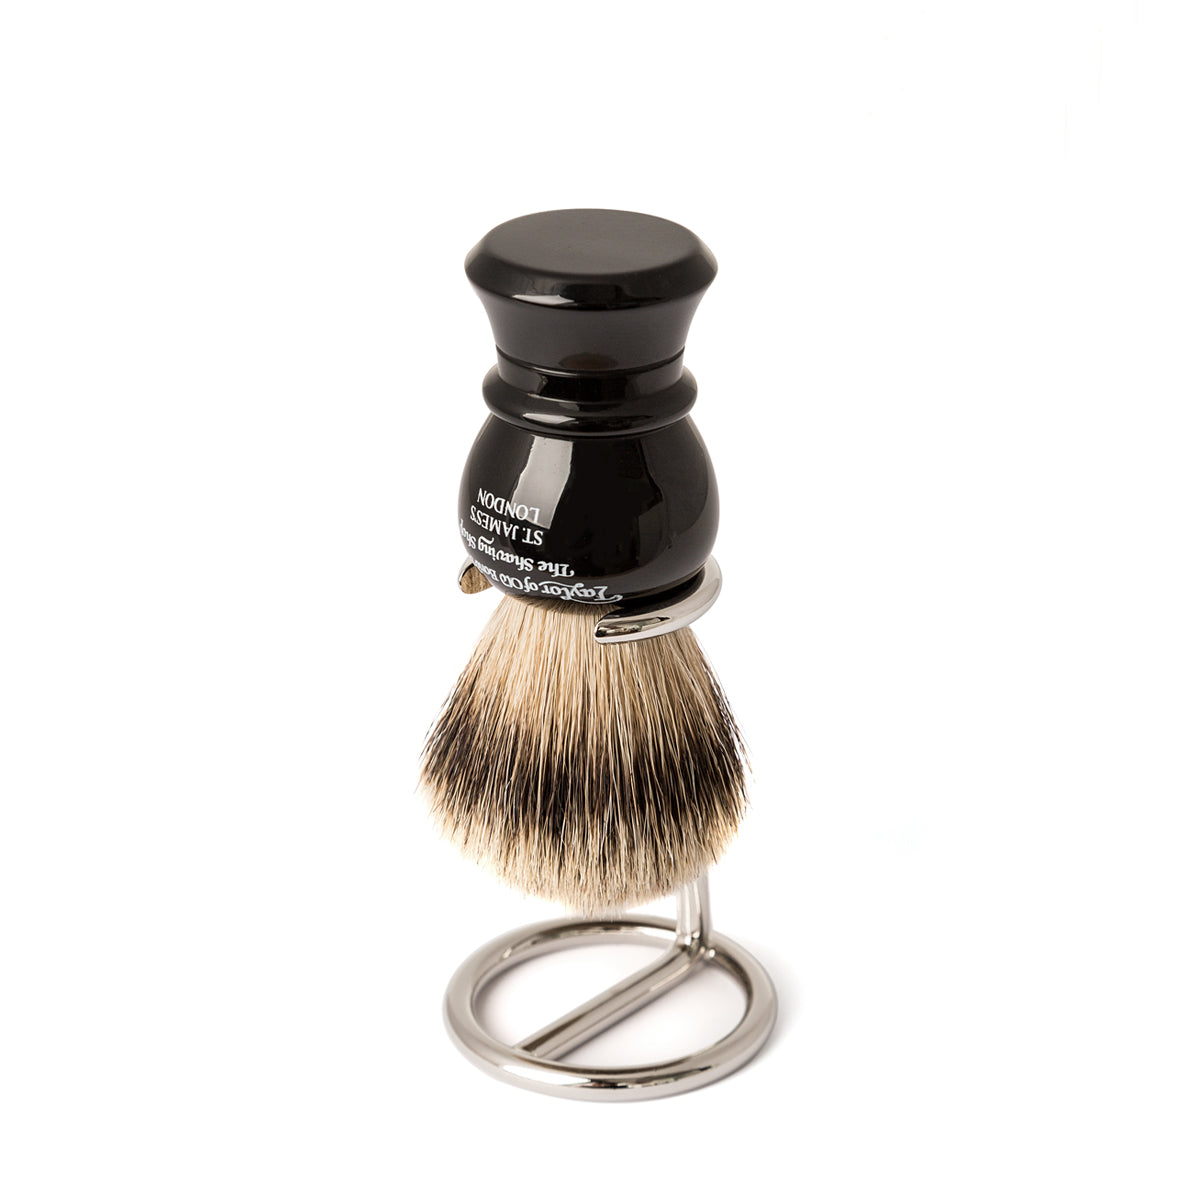 Nickel Shaving Brush Stand from Taylor of Old Bond Street